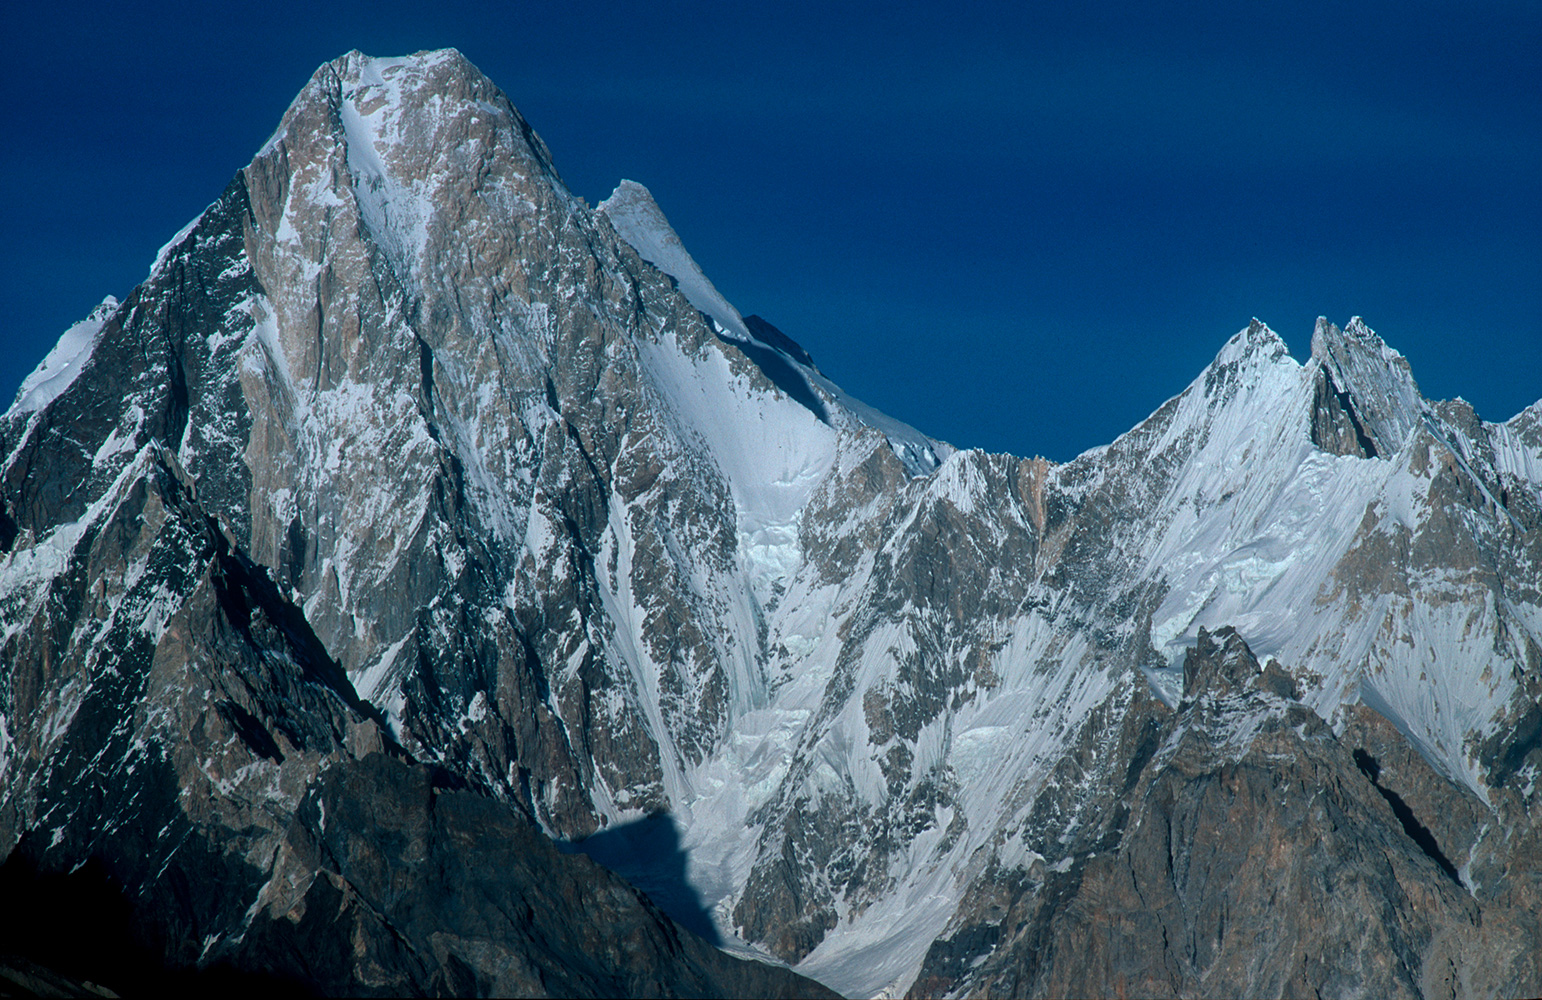 Telephoto of the west face from Goro. Gasherbrum II (8035m) is just visible over the right shoulder.Nikon F5, 180mm